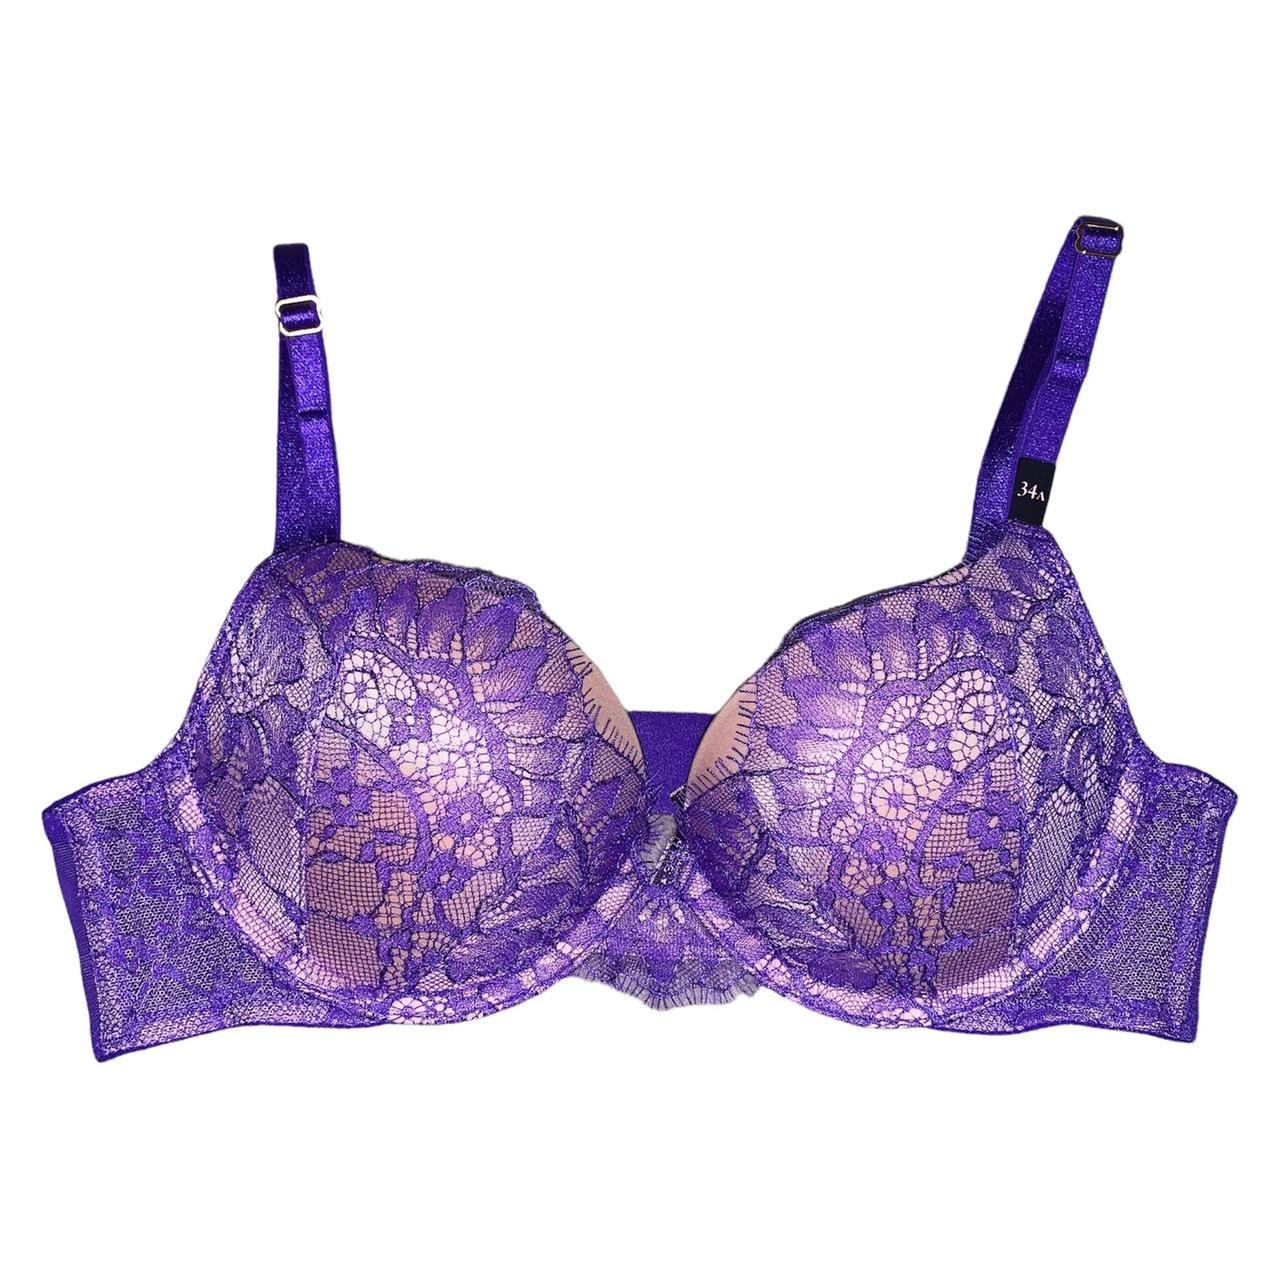 Victoria's Secret BODY BY VICTORIA Lace BRA Lila Body 38C front snap Size  38 C - $25 - From Marjorie